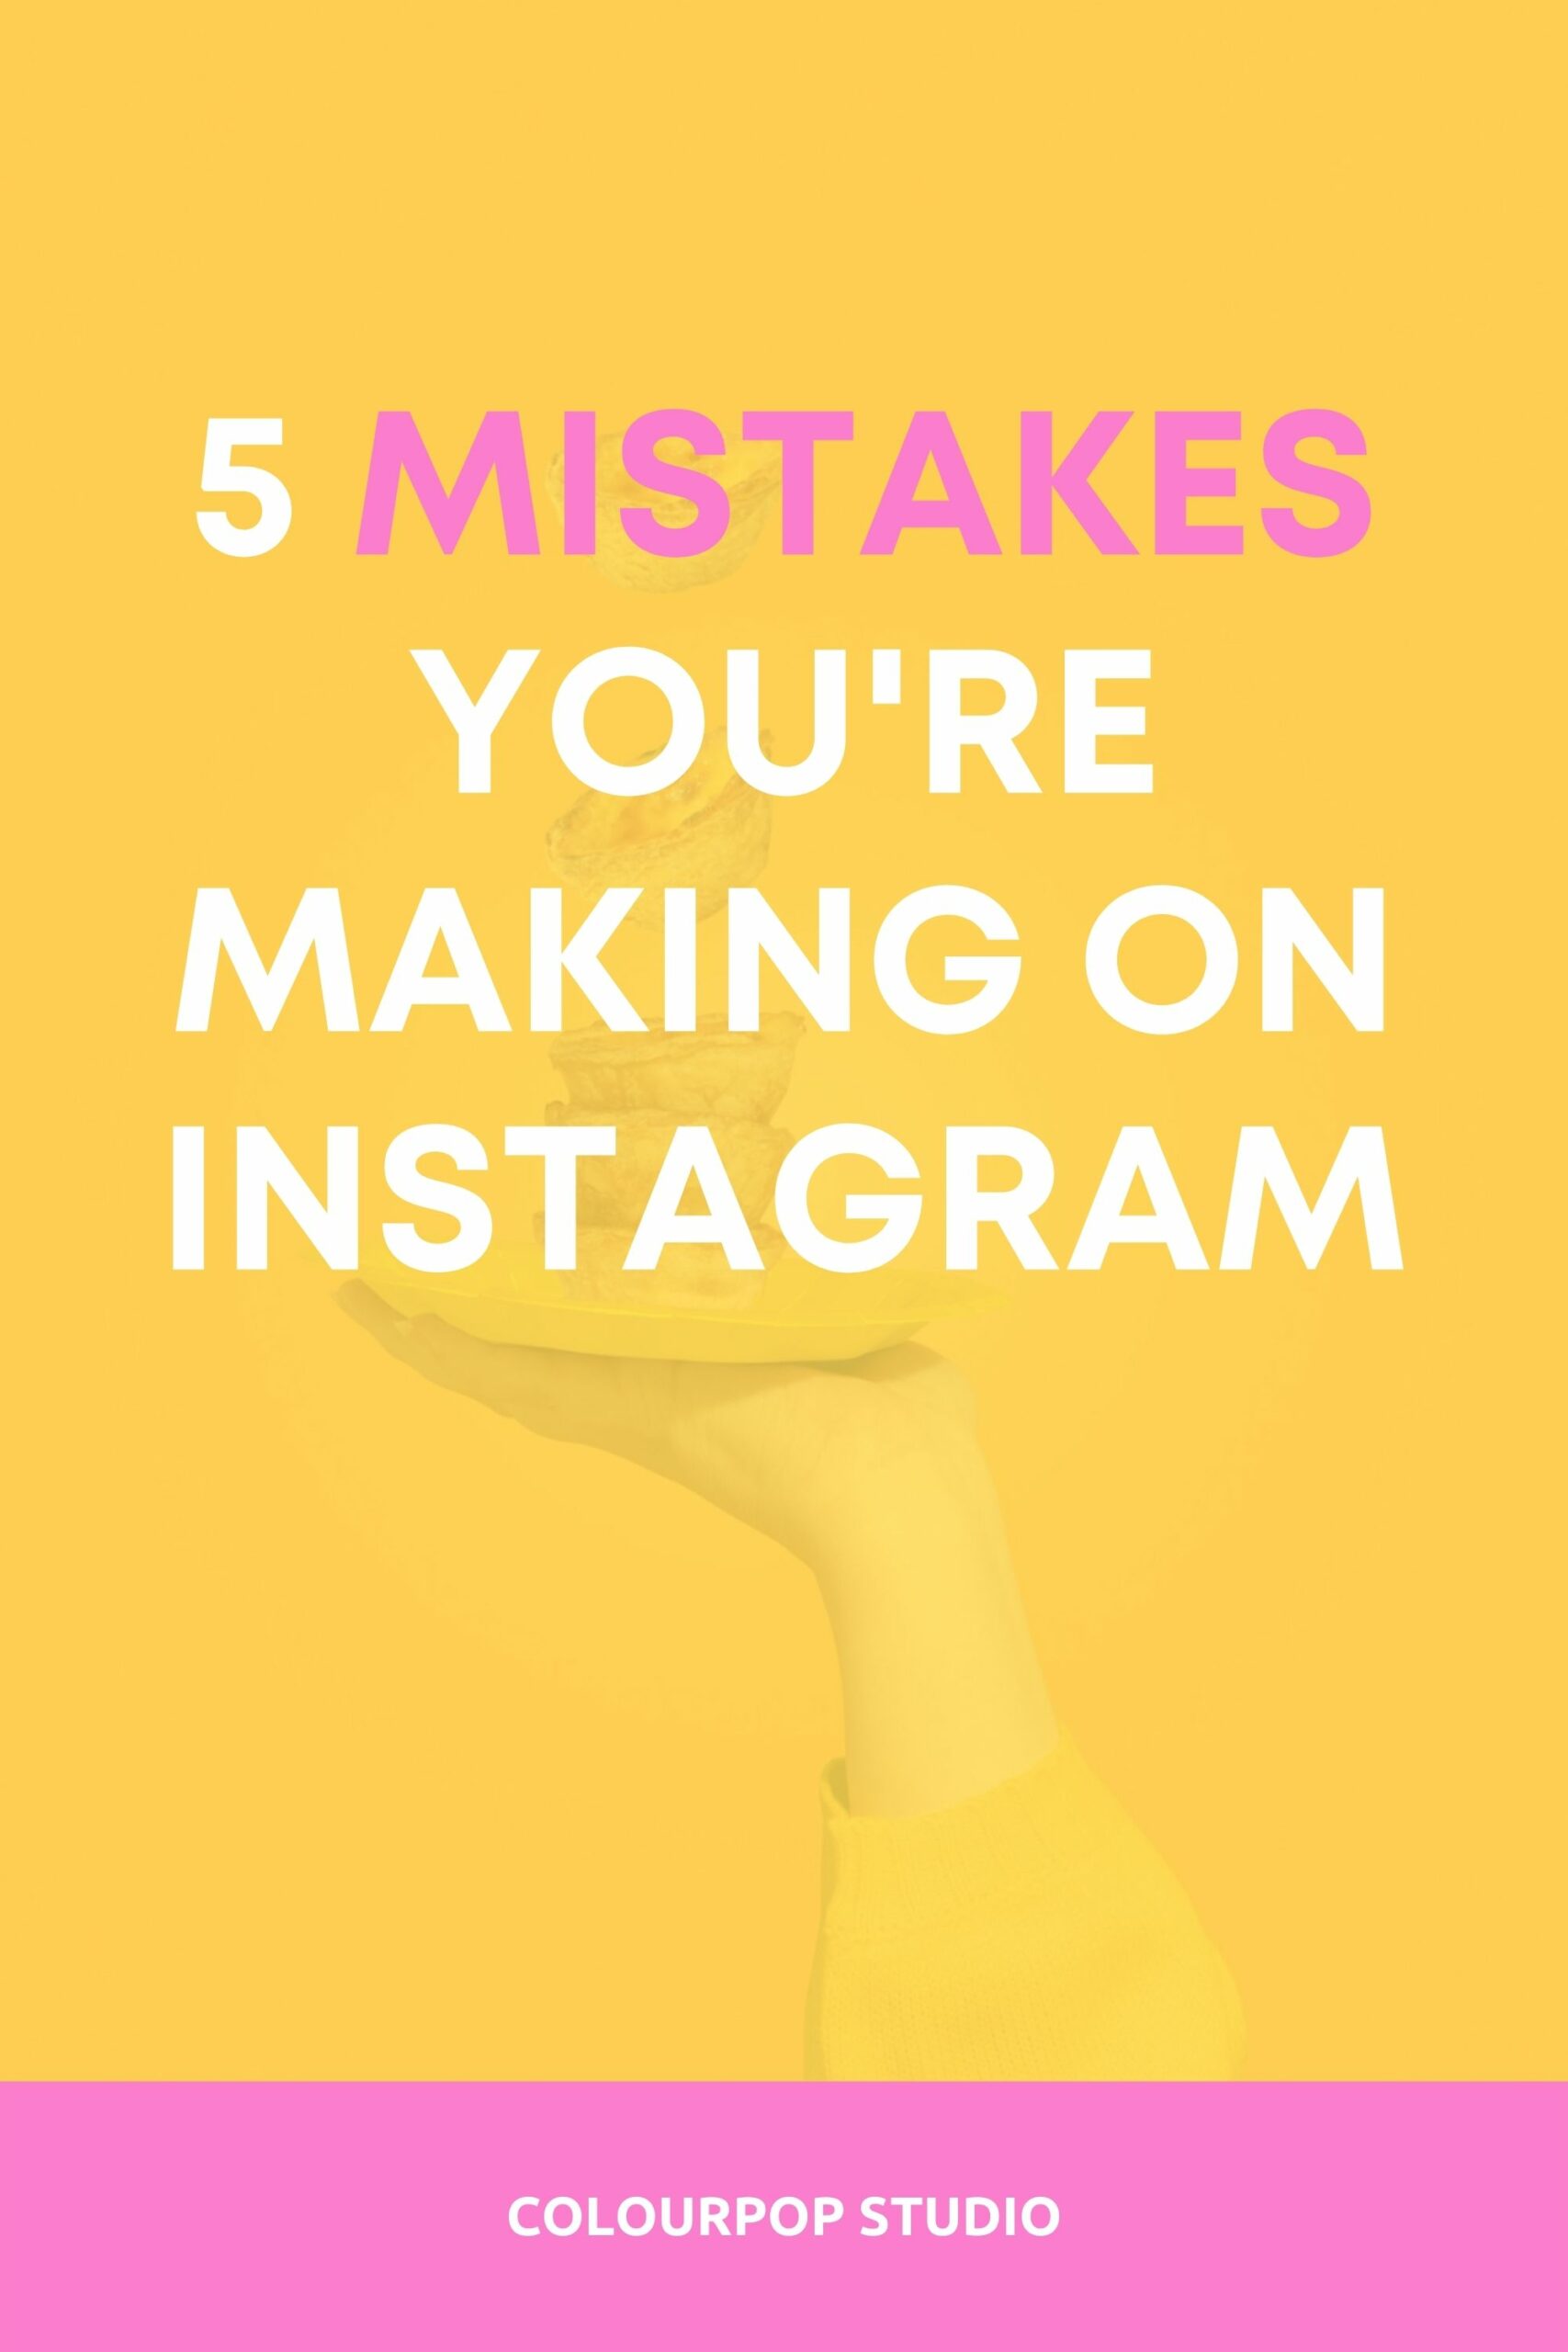 5 Mistakes you're making on Instagram